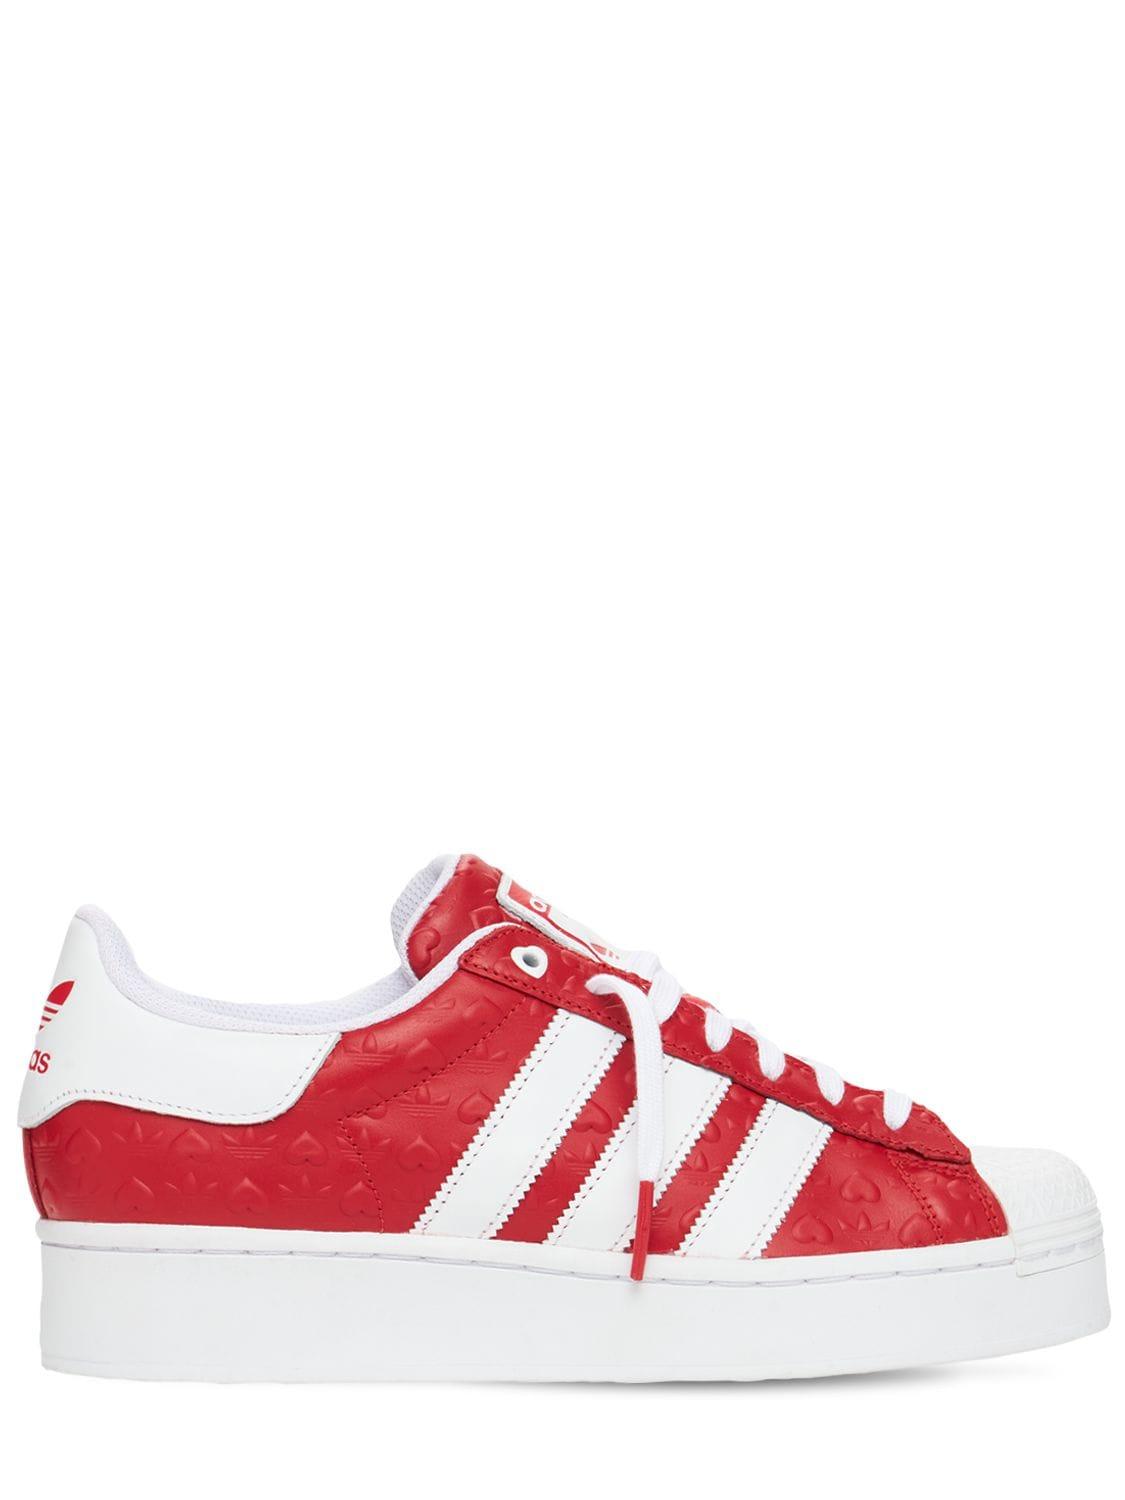 adidas Originals Leather Valentines Superstar Bold Sneakers in 